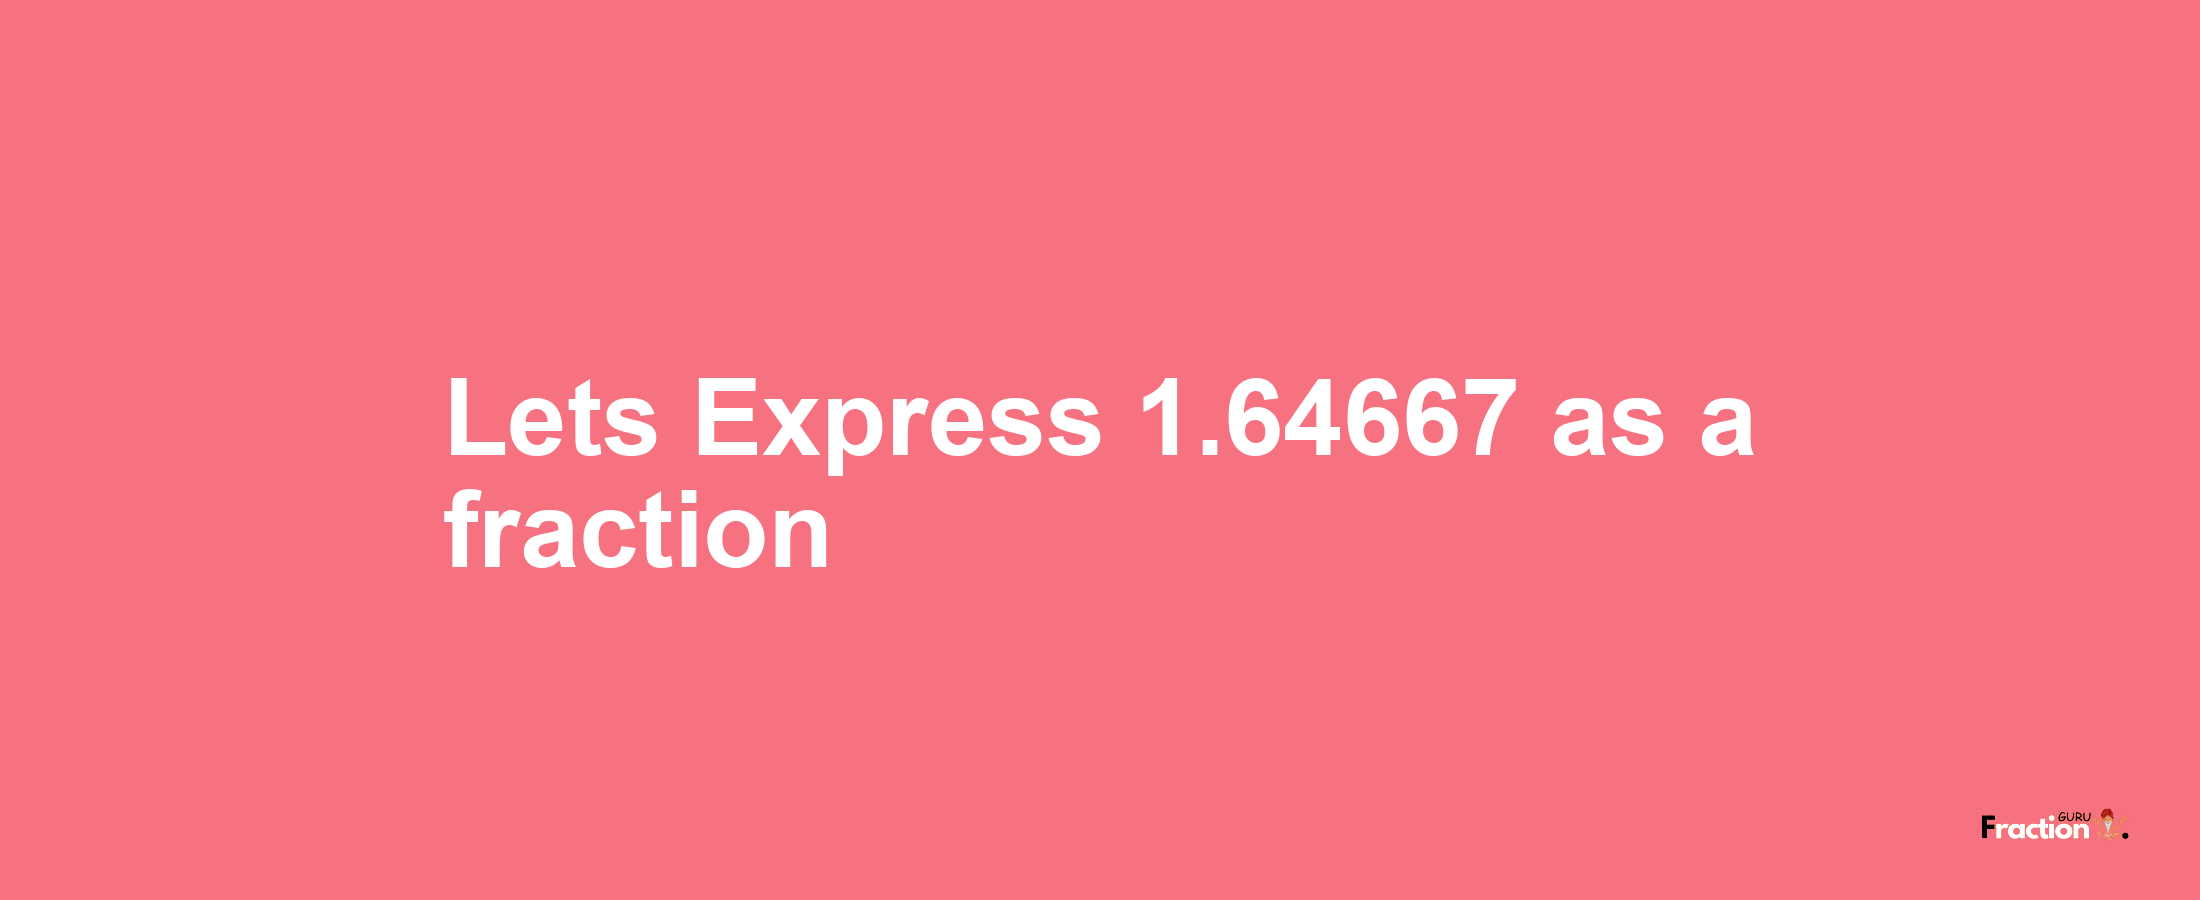 Lets Express 1.64667 as afraction